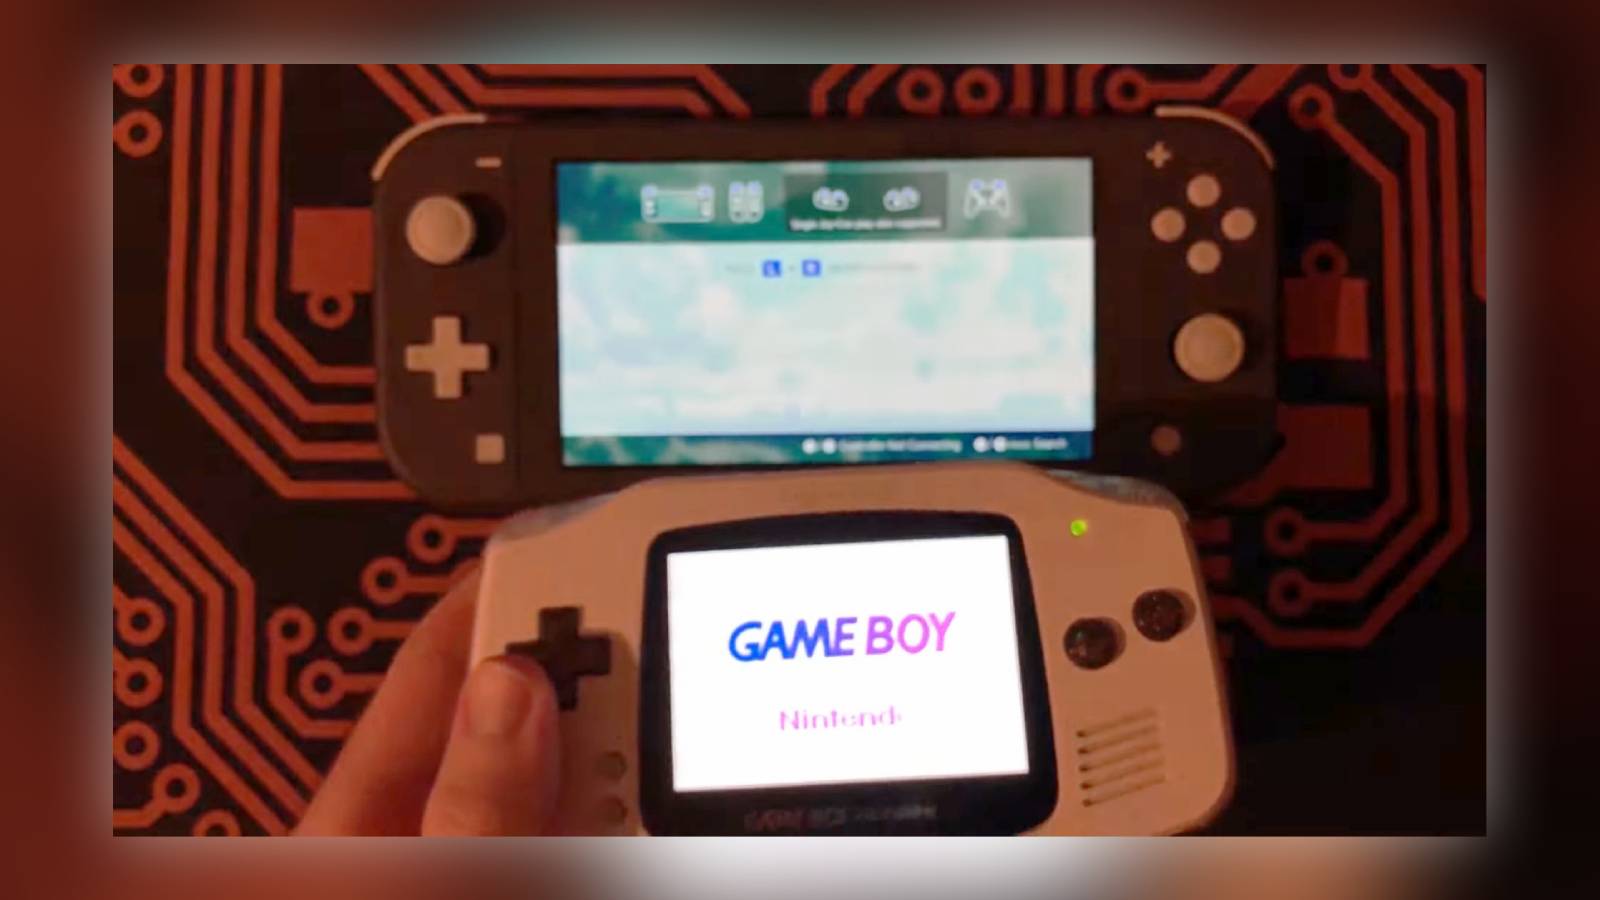 Image from the insideGadgets YouTube video, showing the GBA controlling the Nintendo Switch.